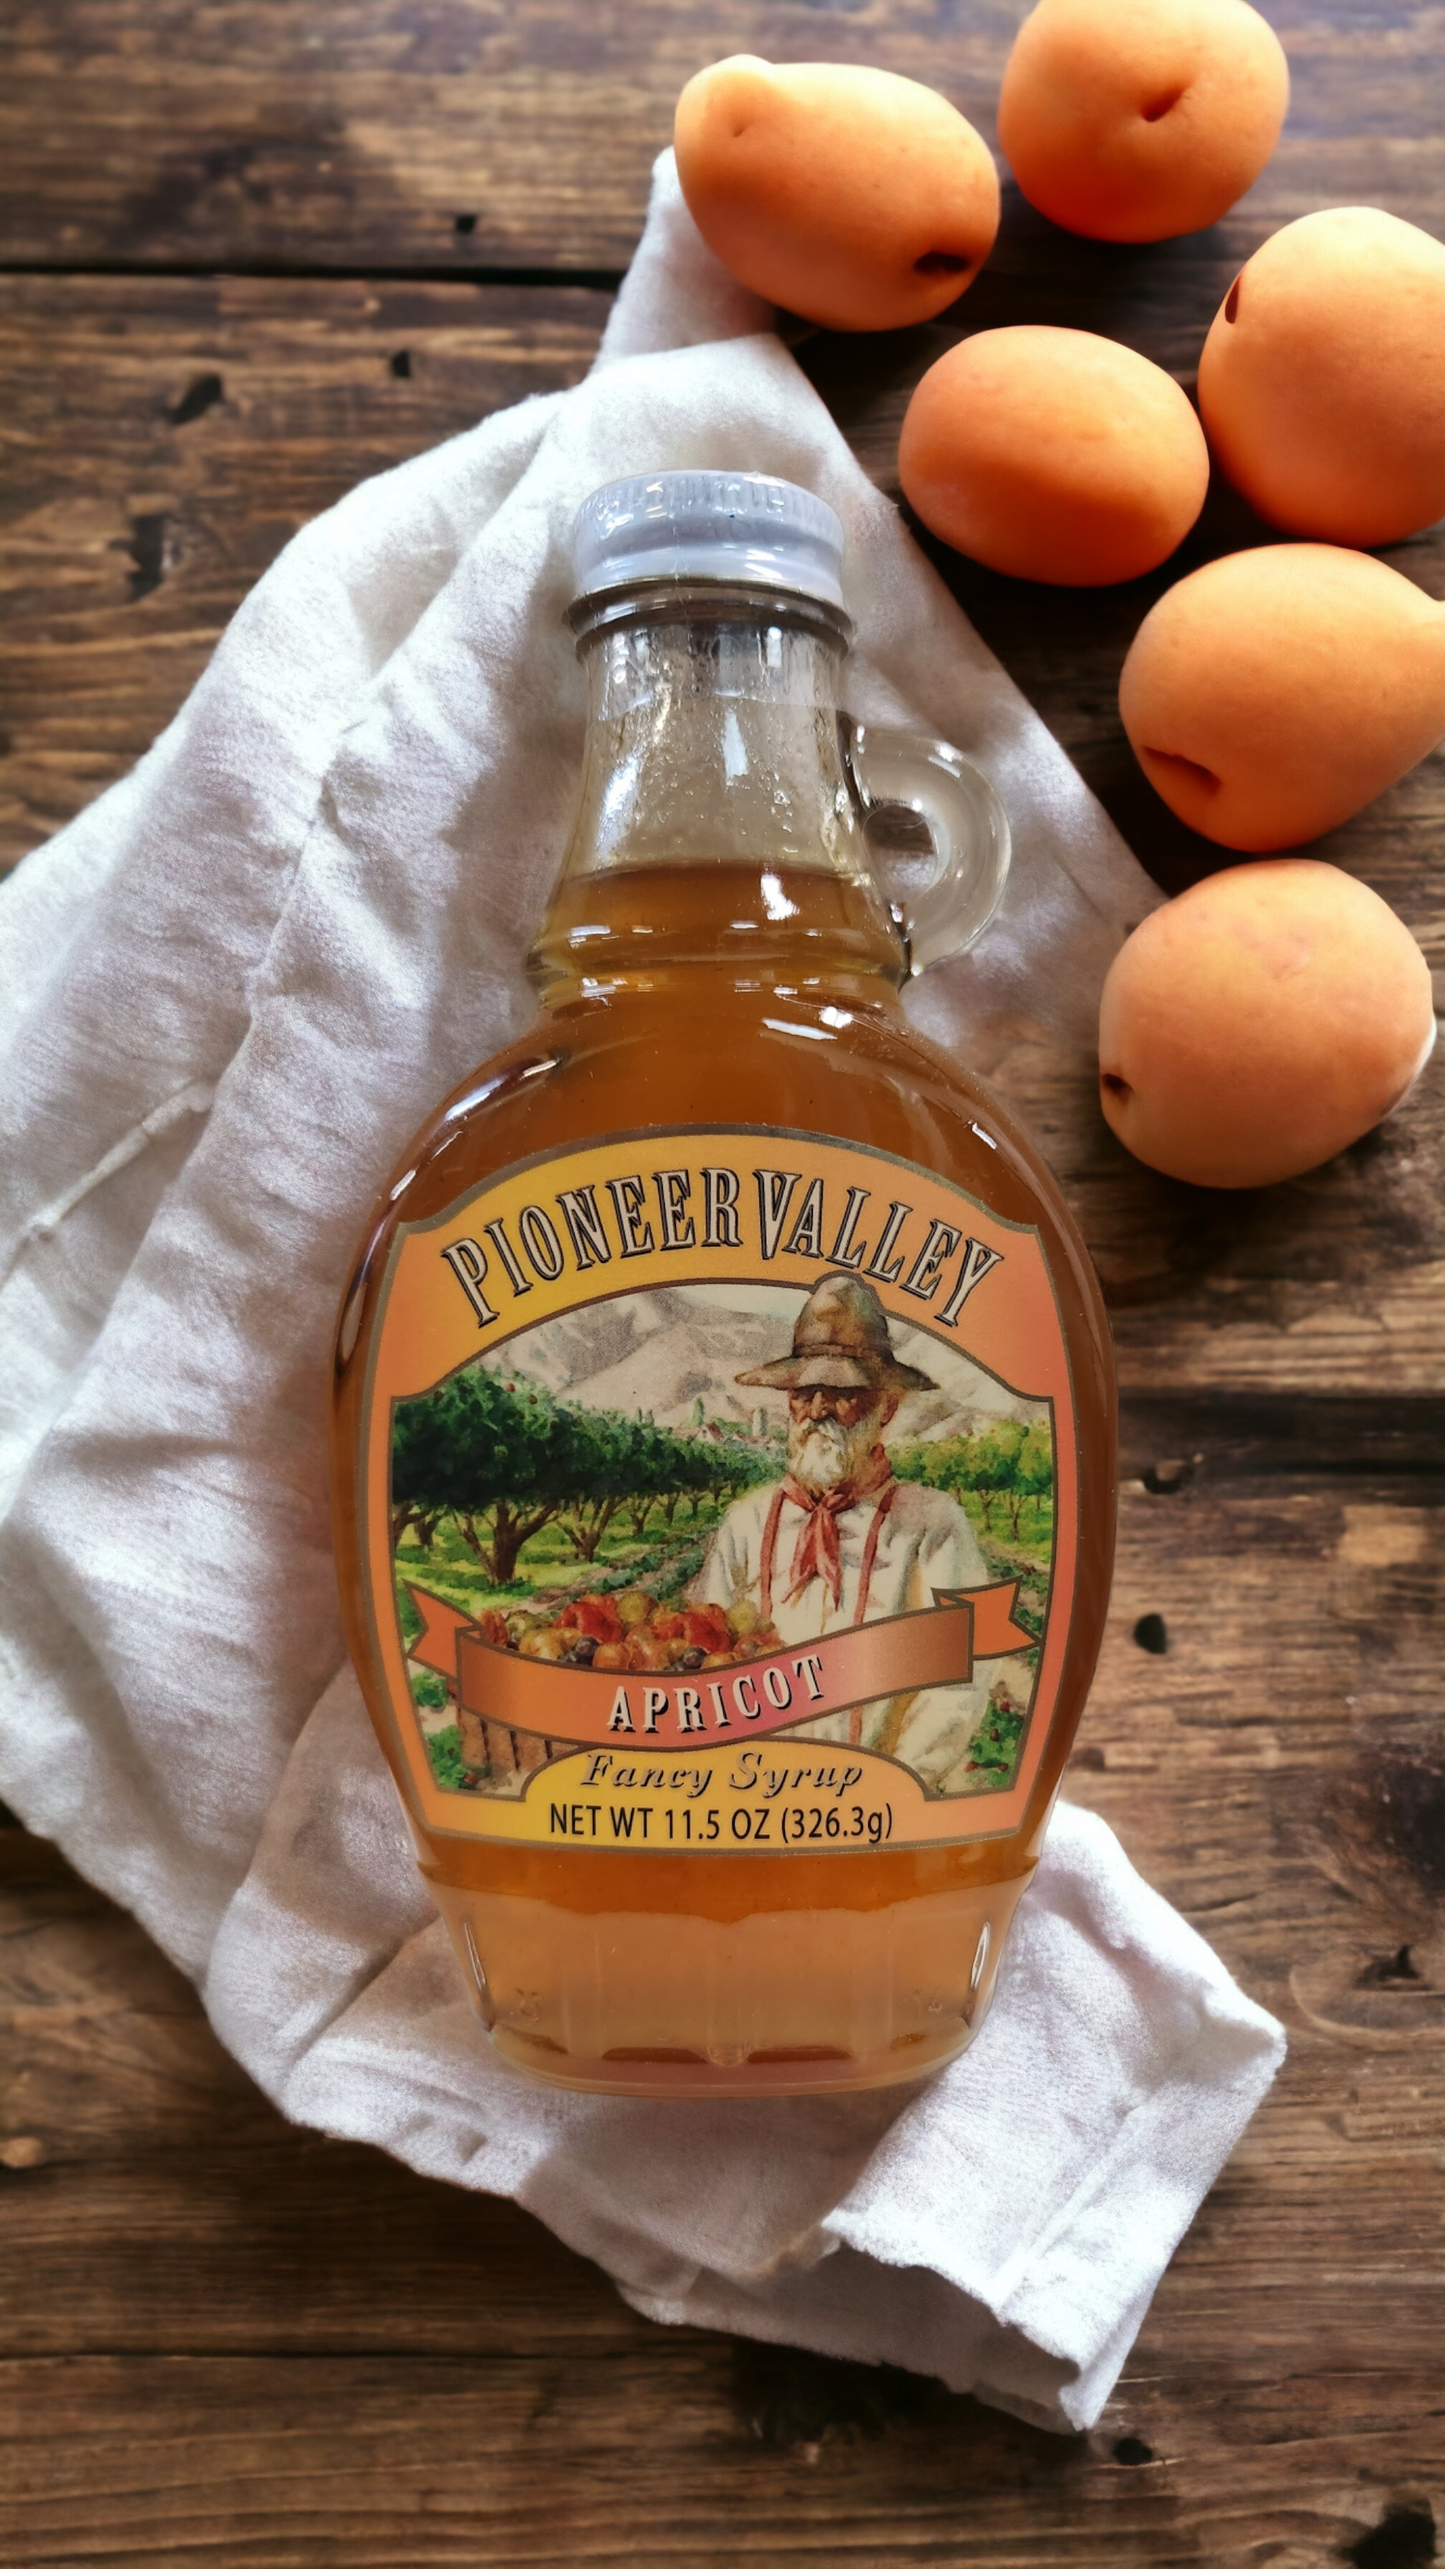 Apricot Syrup